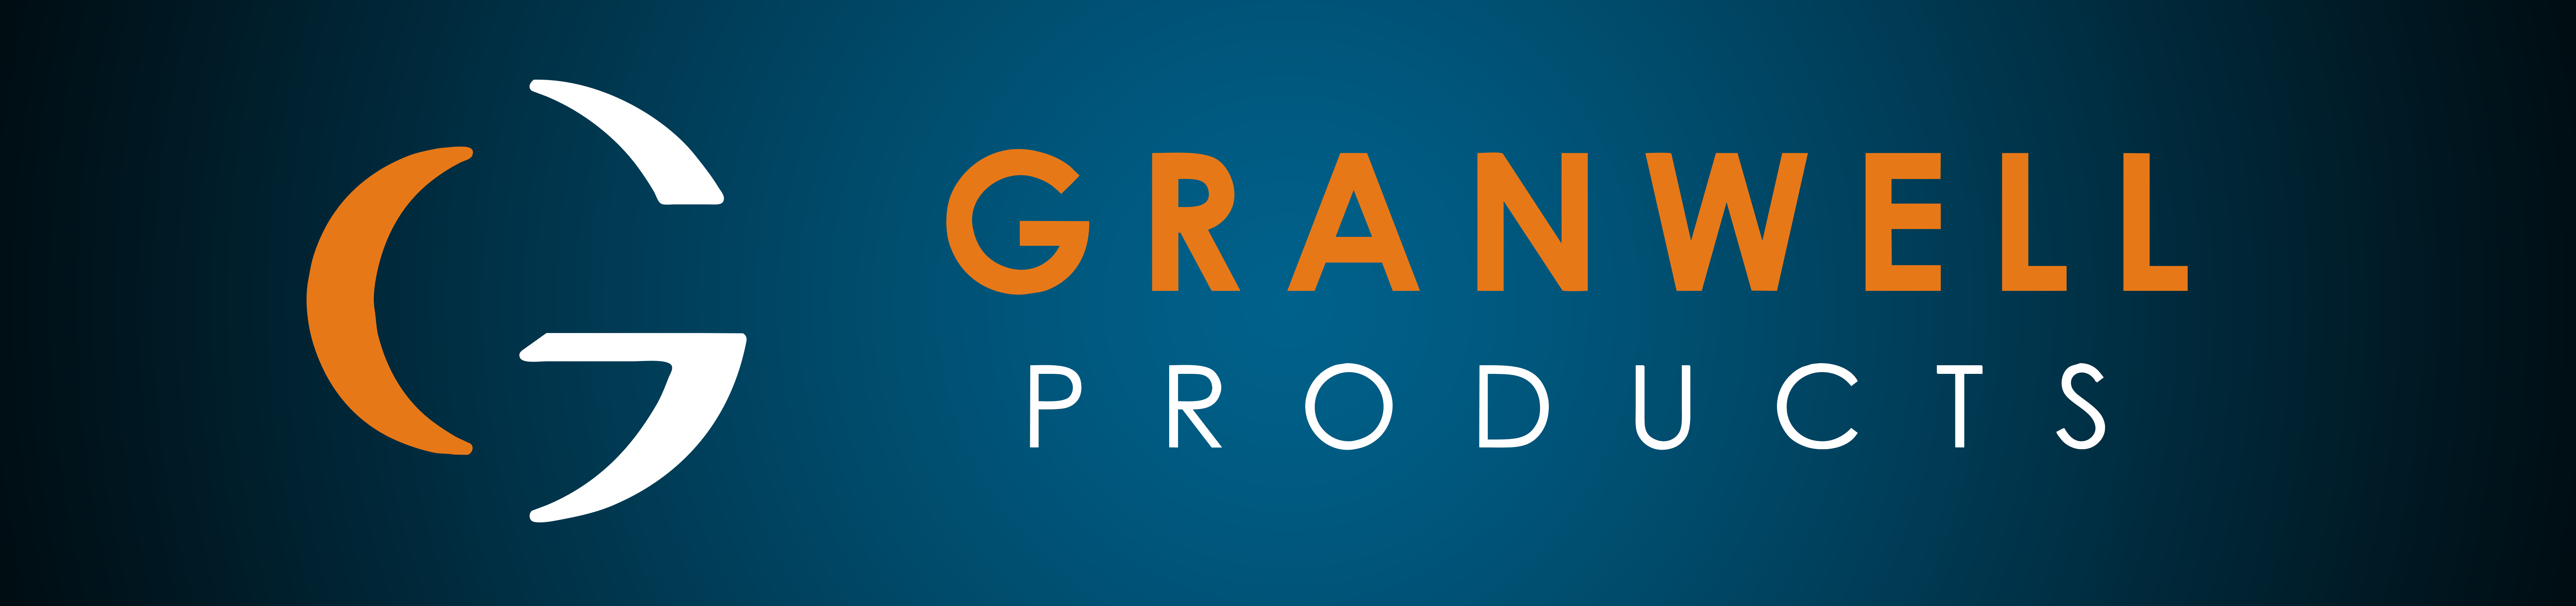 Granwell Products Inc